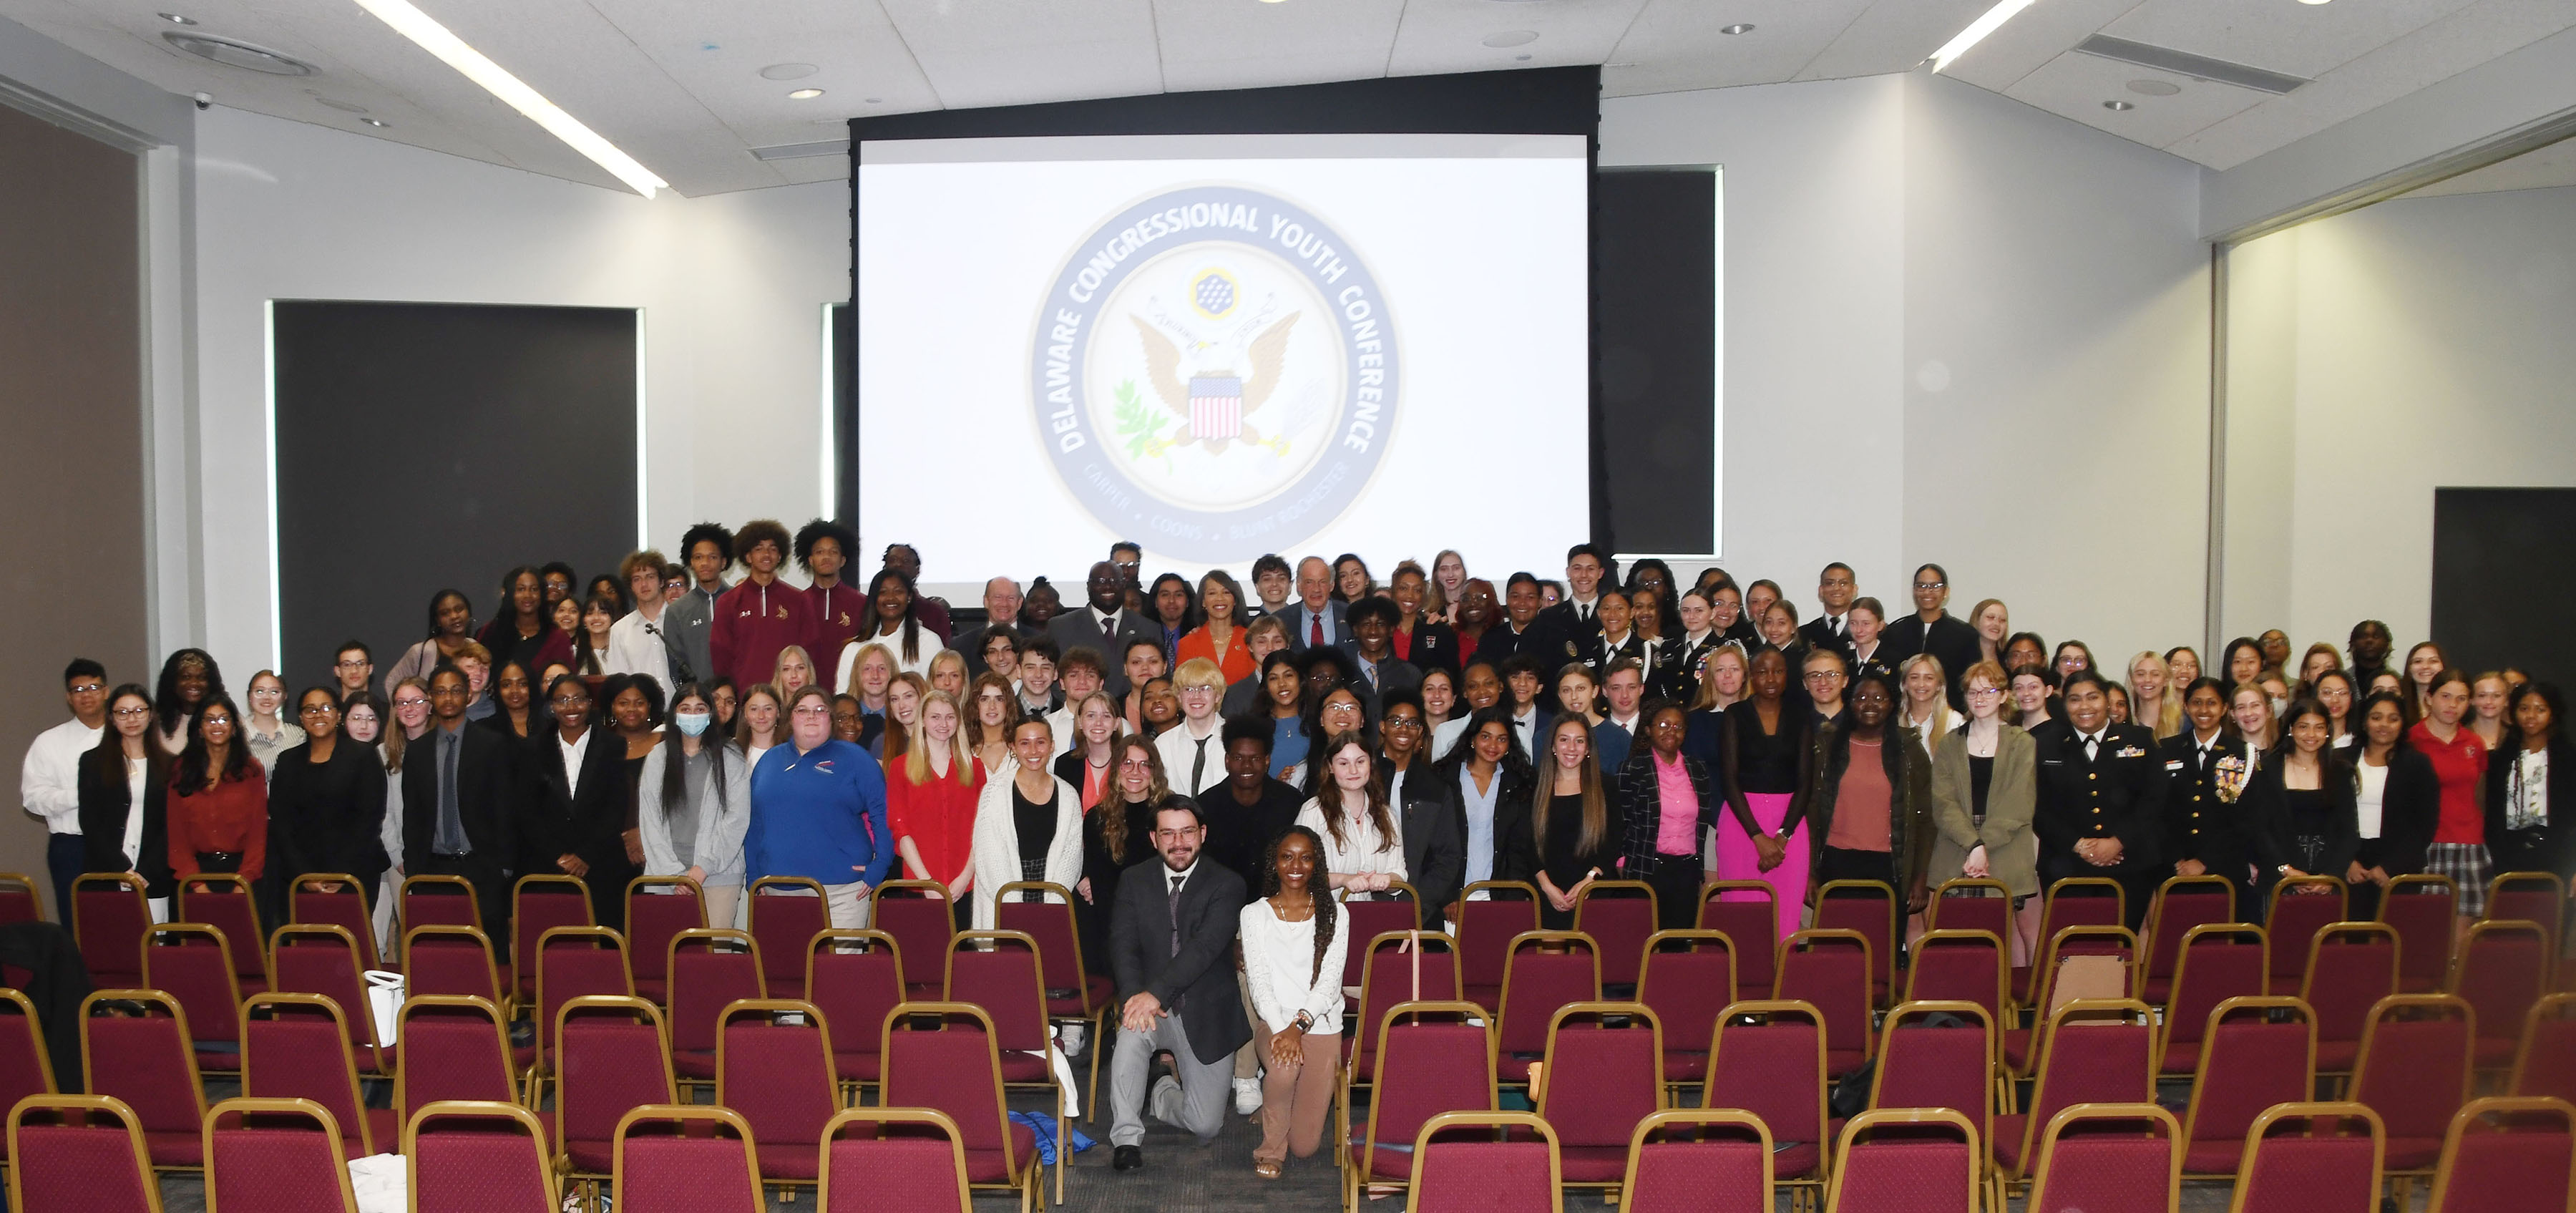 A group shot from the Delaware Congressional Youth Conference.